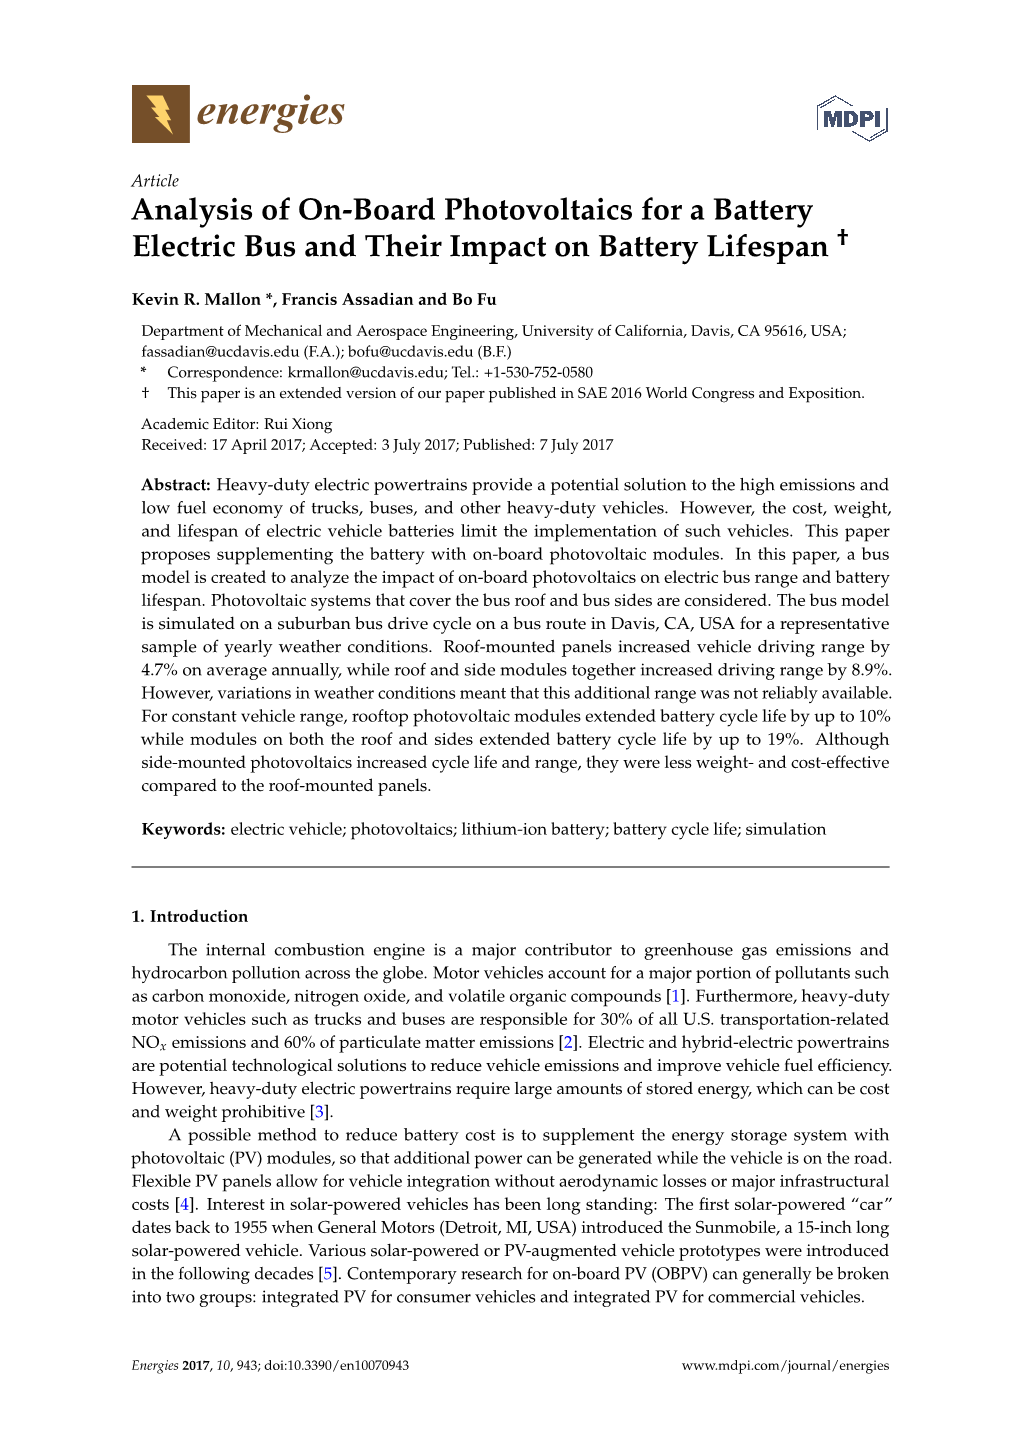 Analysis of On-Board Photovoltaics for a Battery Electric Bus and Their Impact on Battery Lifespan †